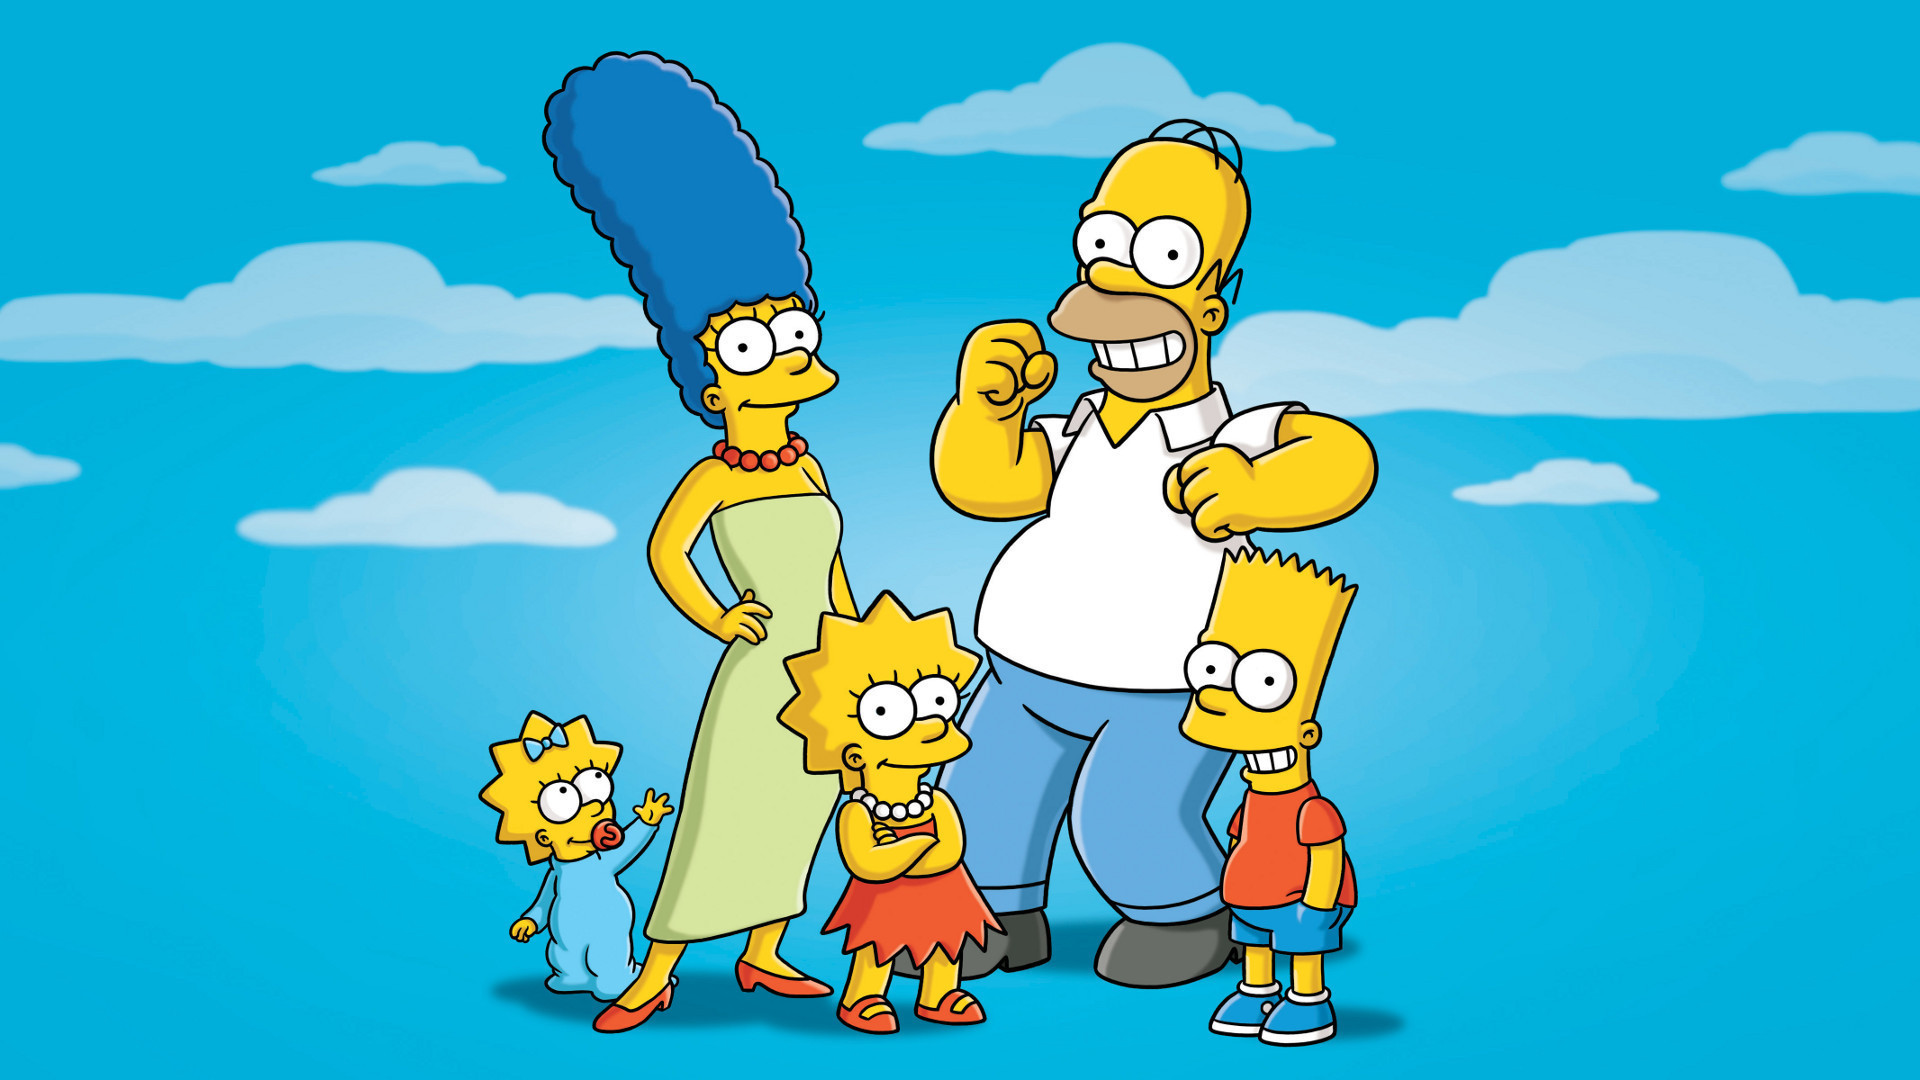 1920x1080 Wallpaper The Simpsons Desktop Wallpapers Pictures to pin 